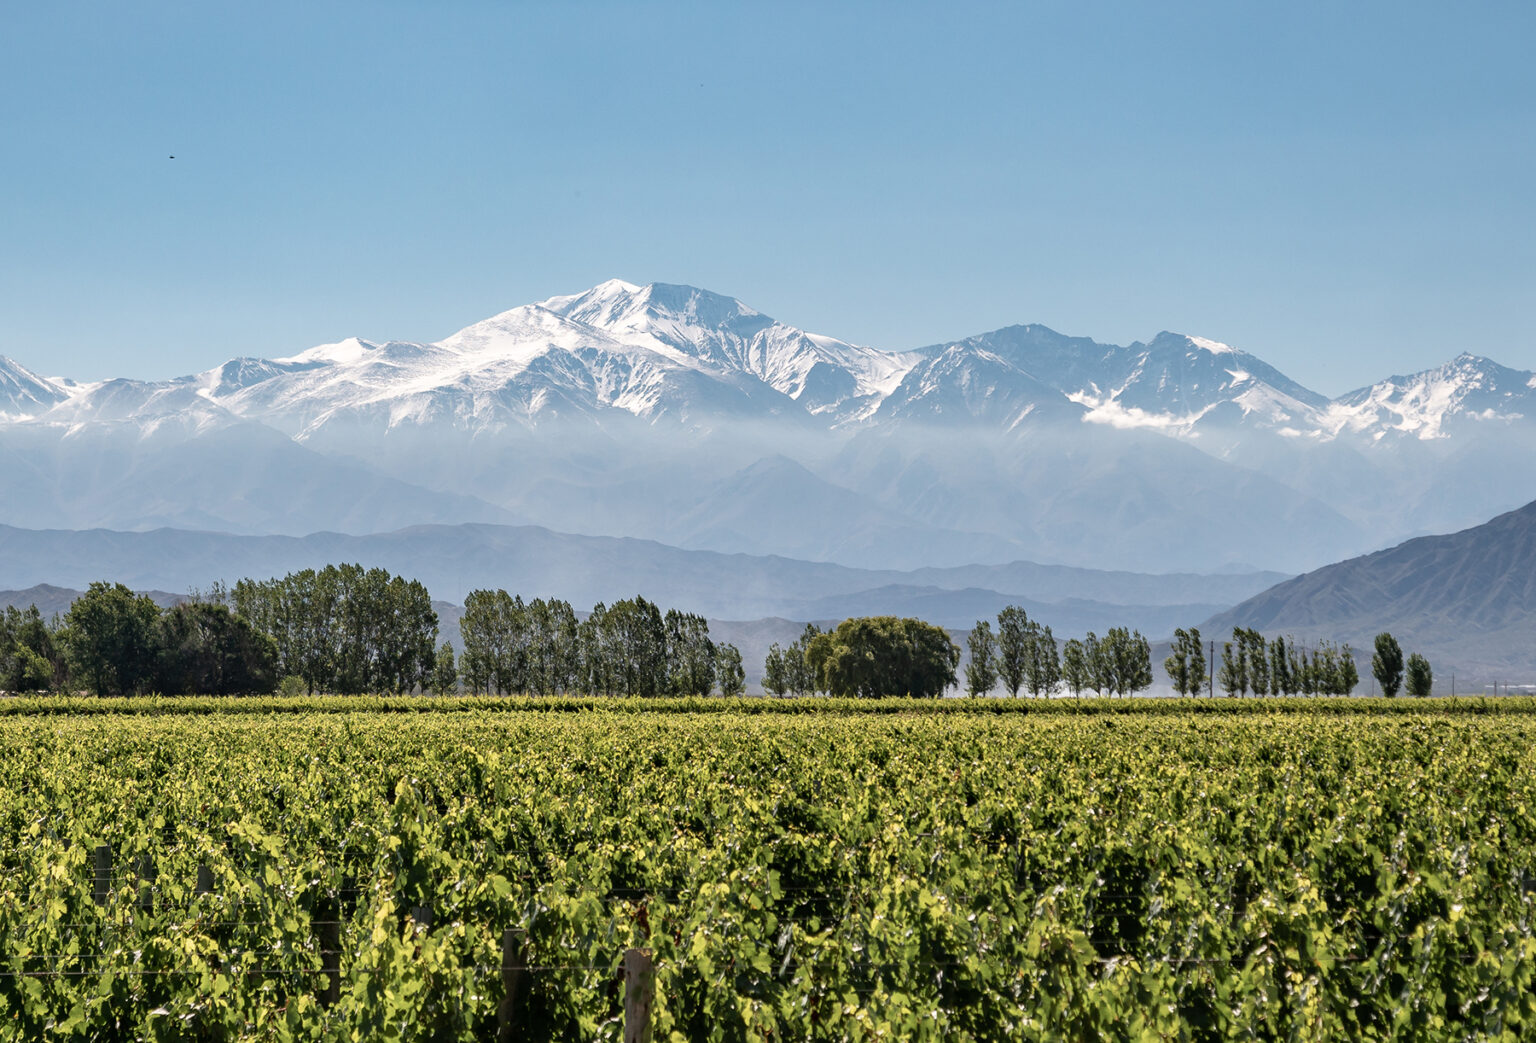 Vineyard with snow capped mountain